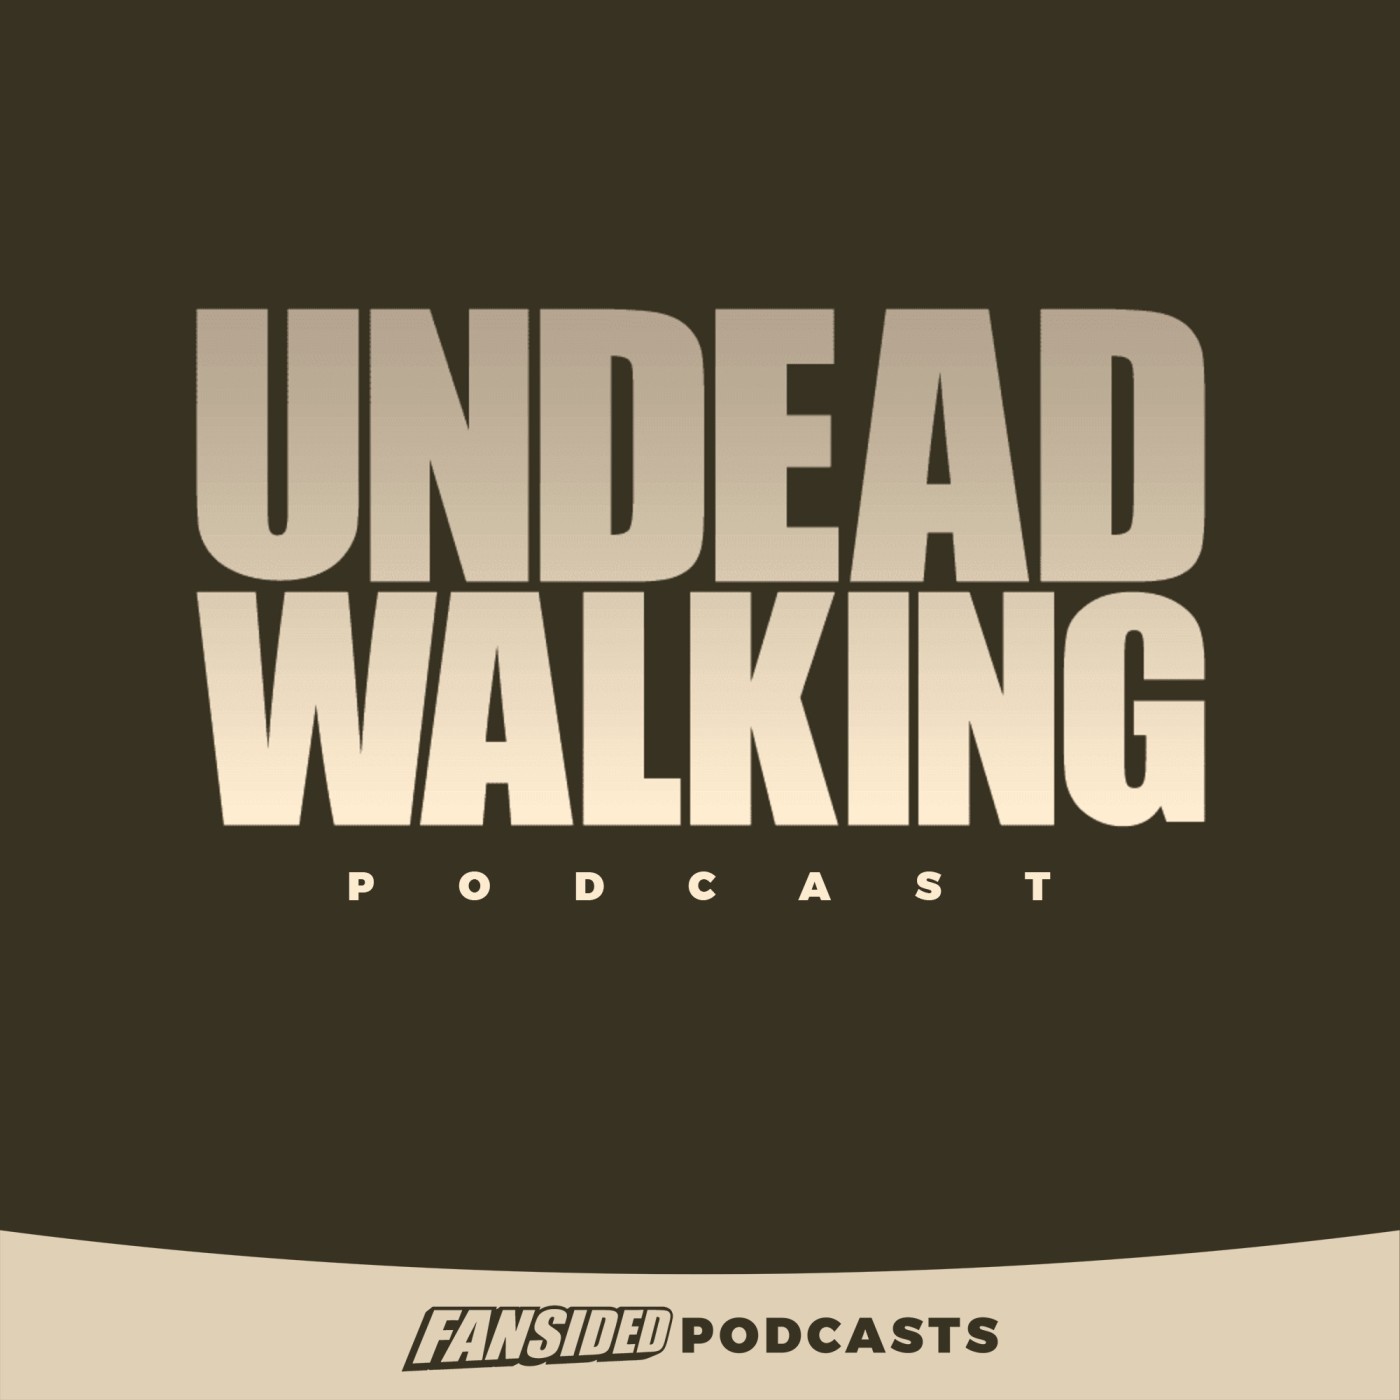 News and Notes from the TWD Universe, June 21